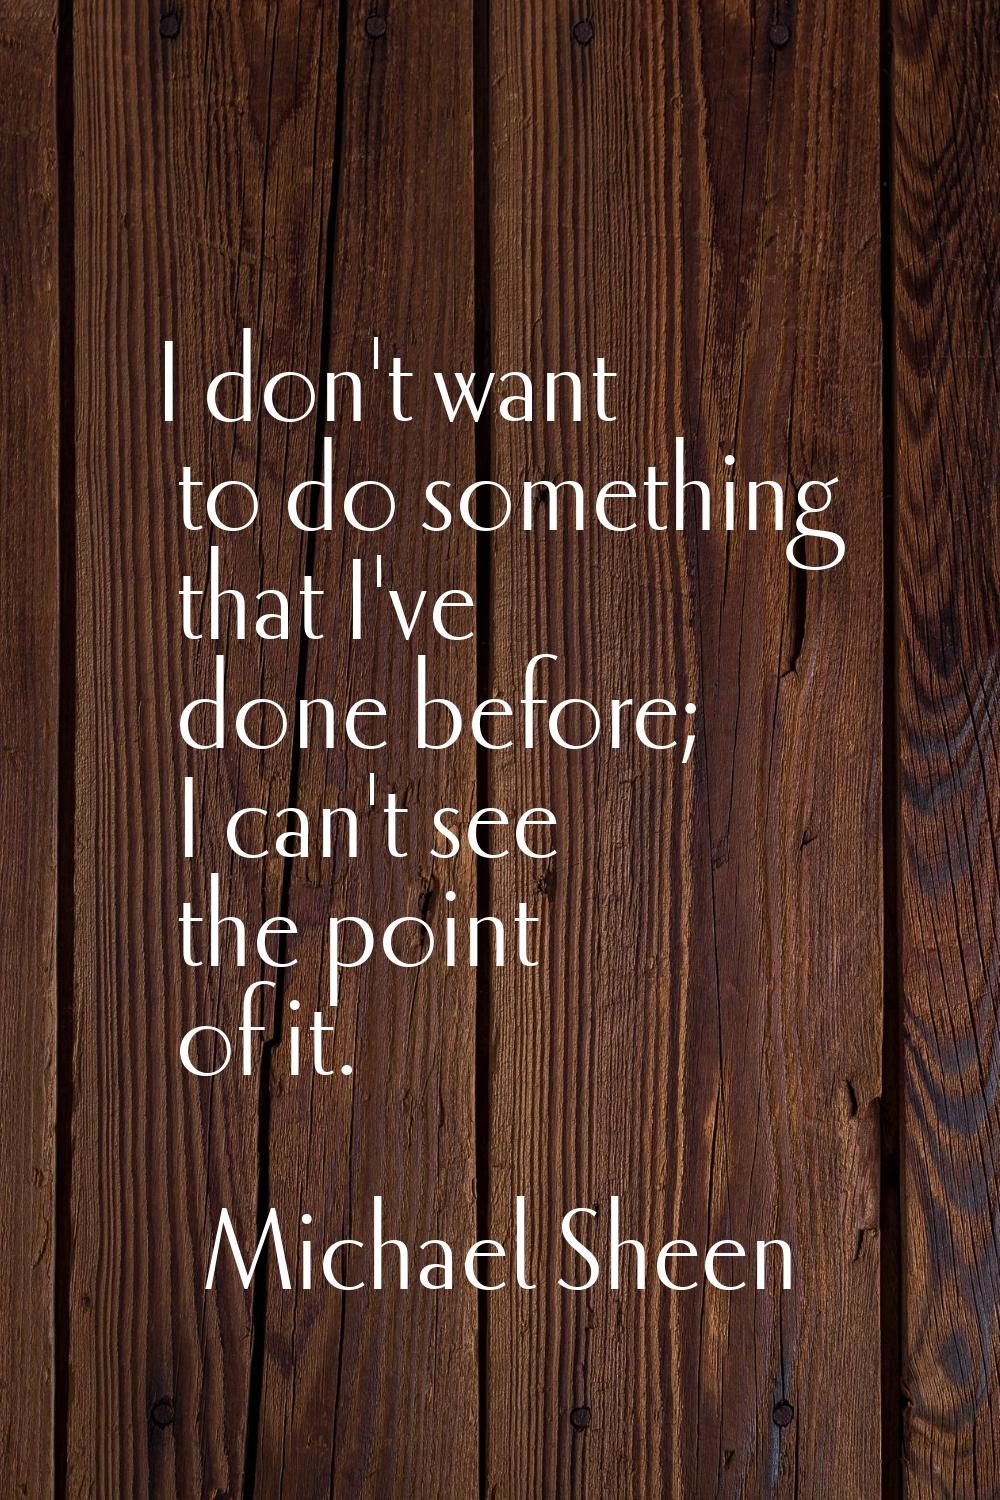 I don't want to do something that I've done before; I can't see the point of it.